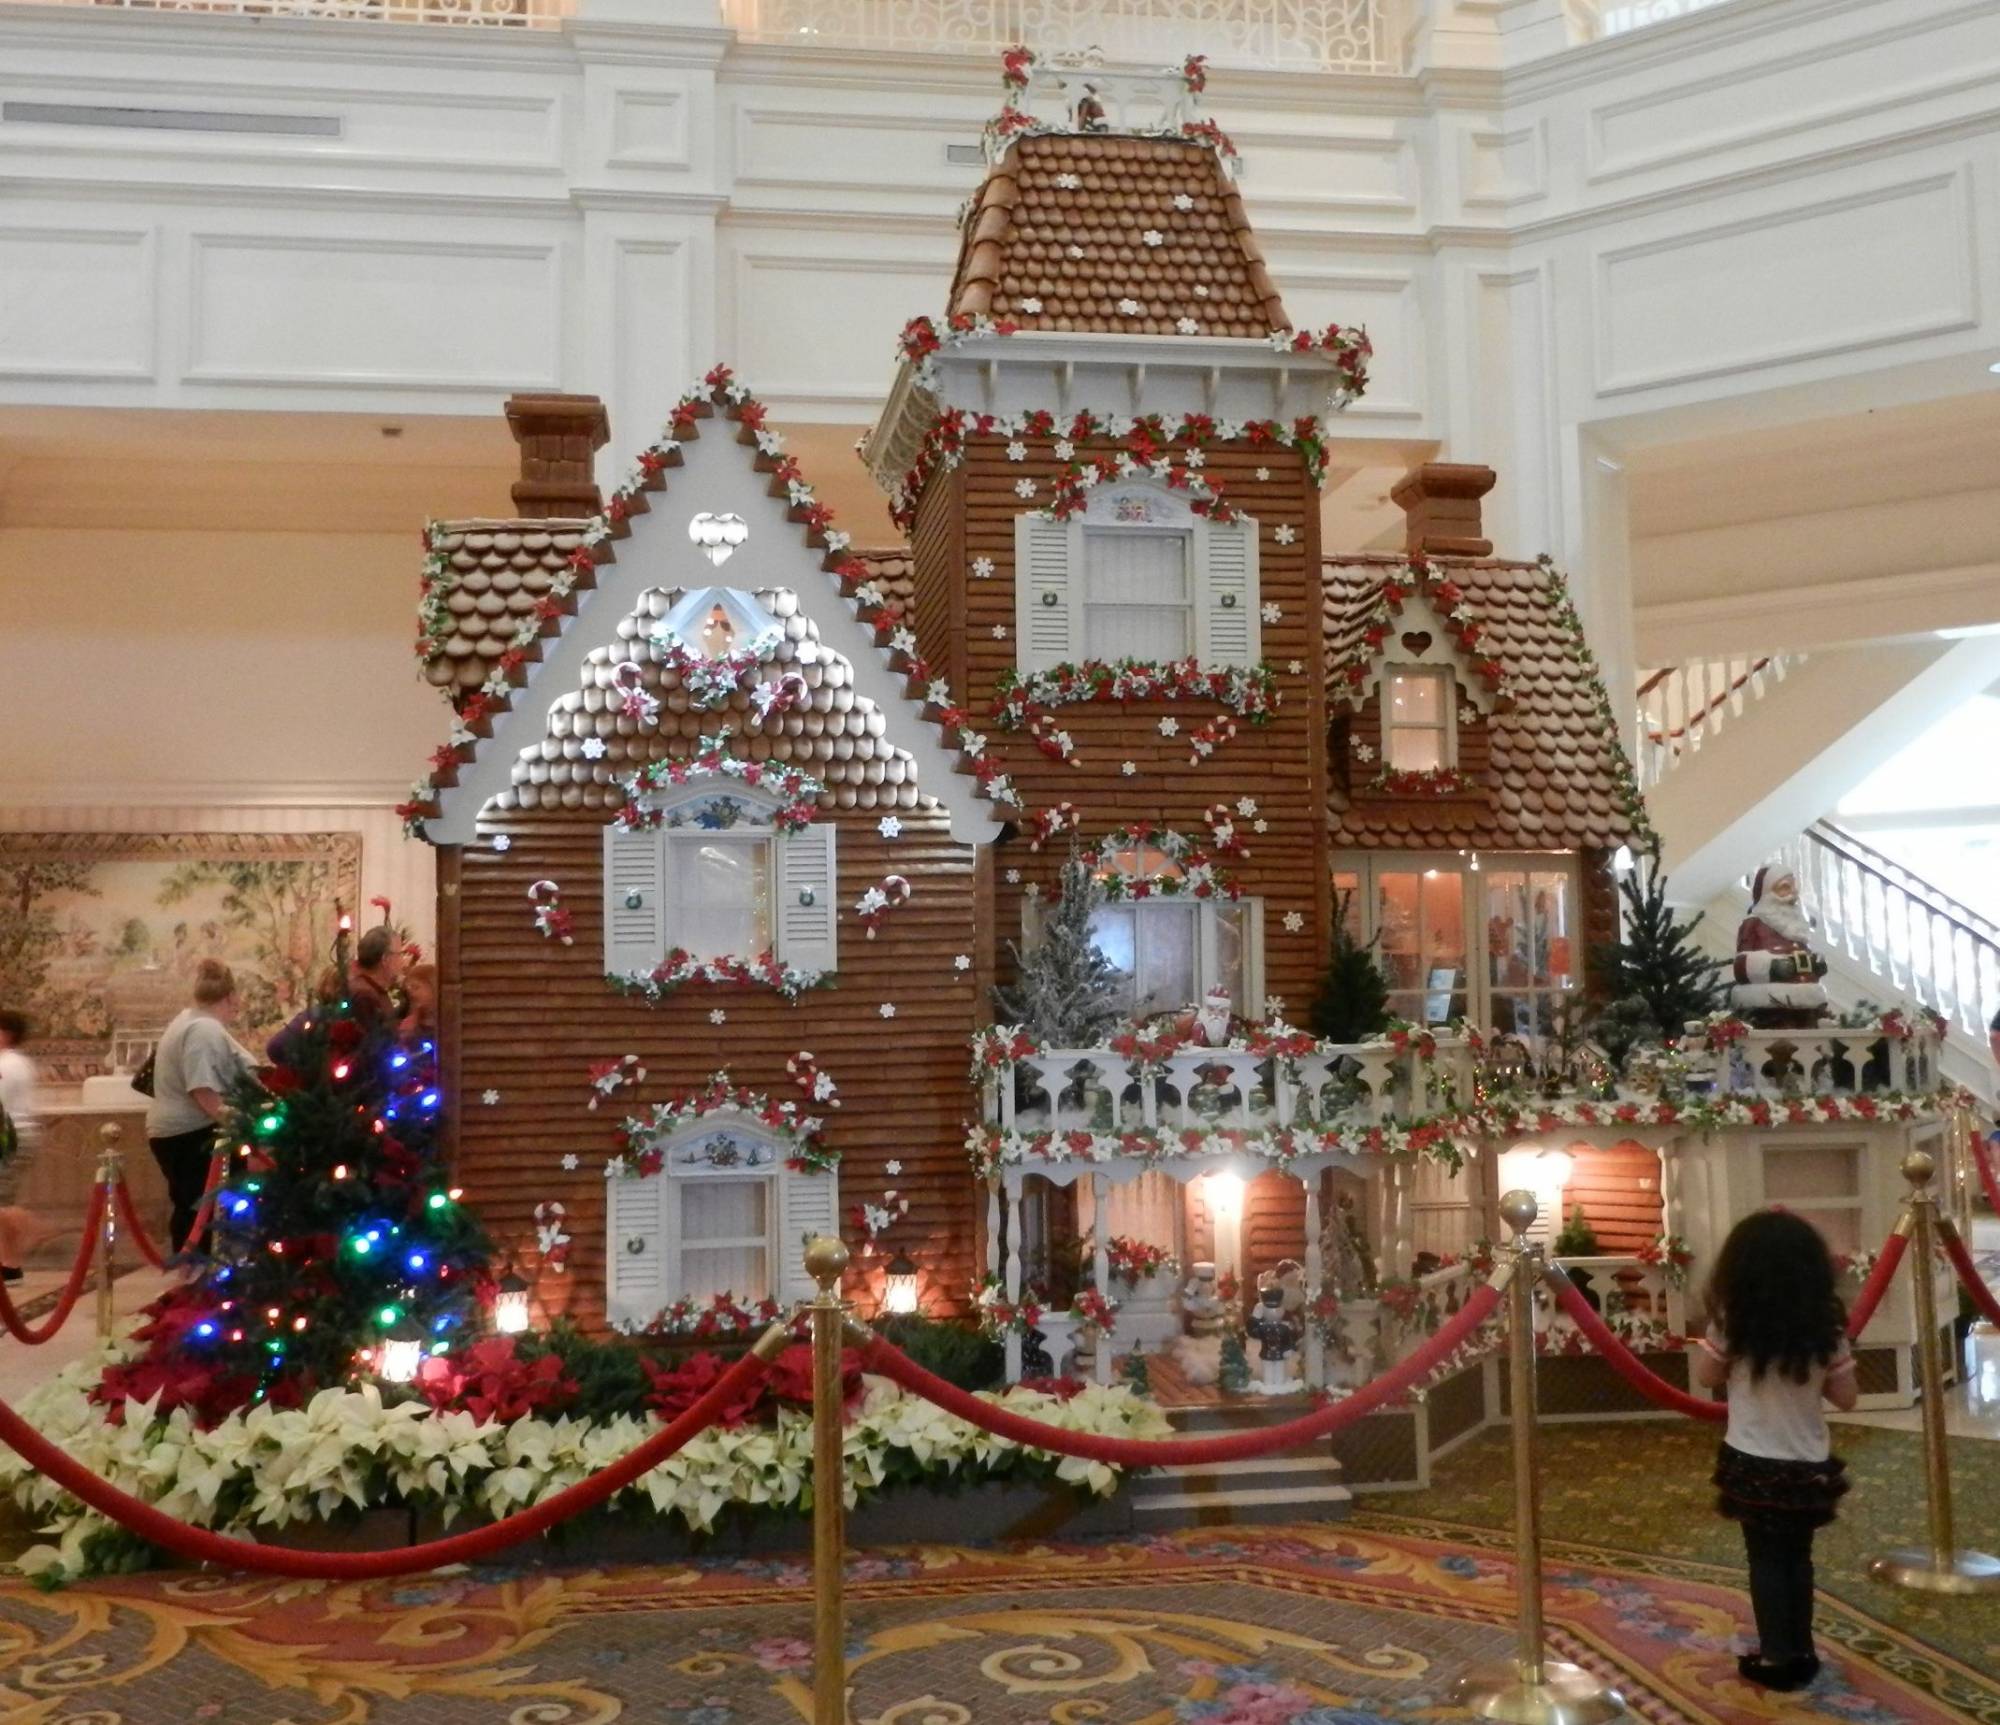 Gingerbread House at the Grand Floridian Resort